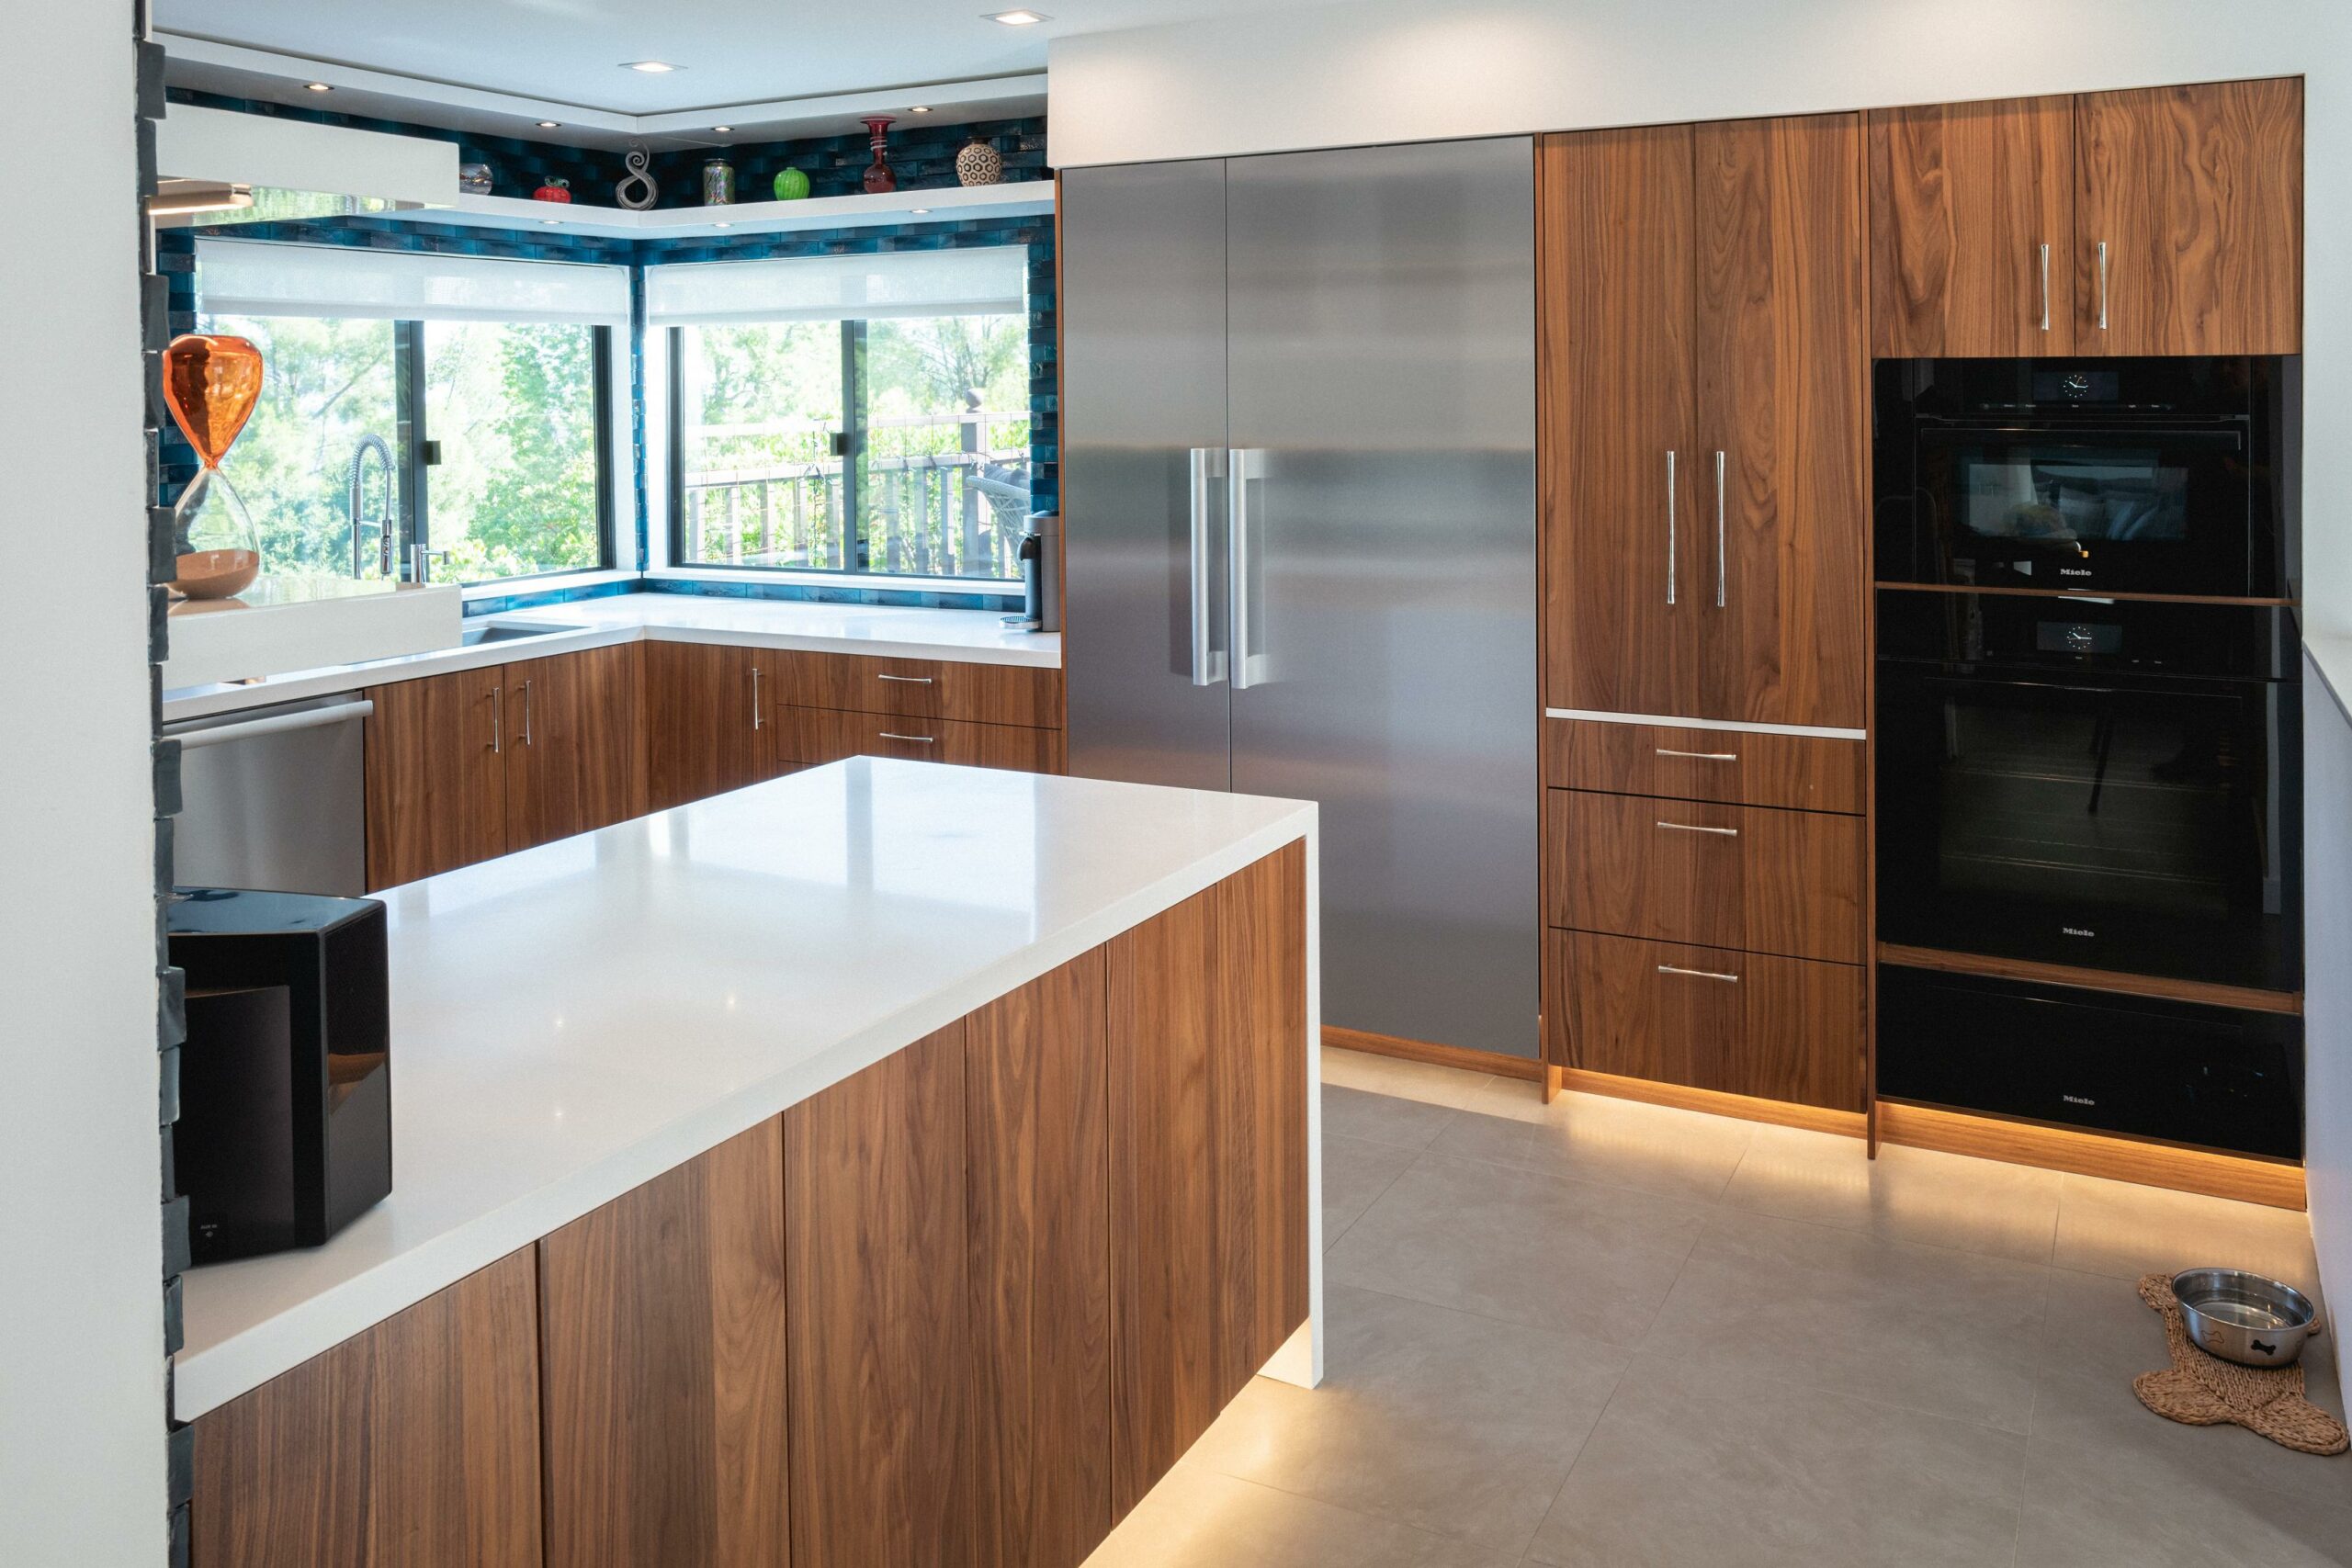 Modern kitchen with wooden cabinets and island.